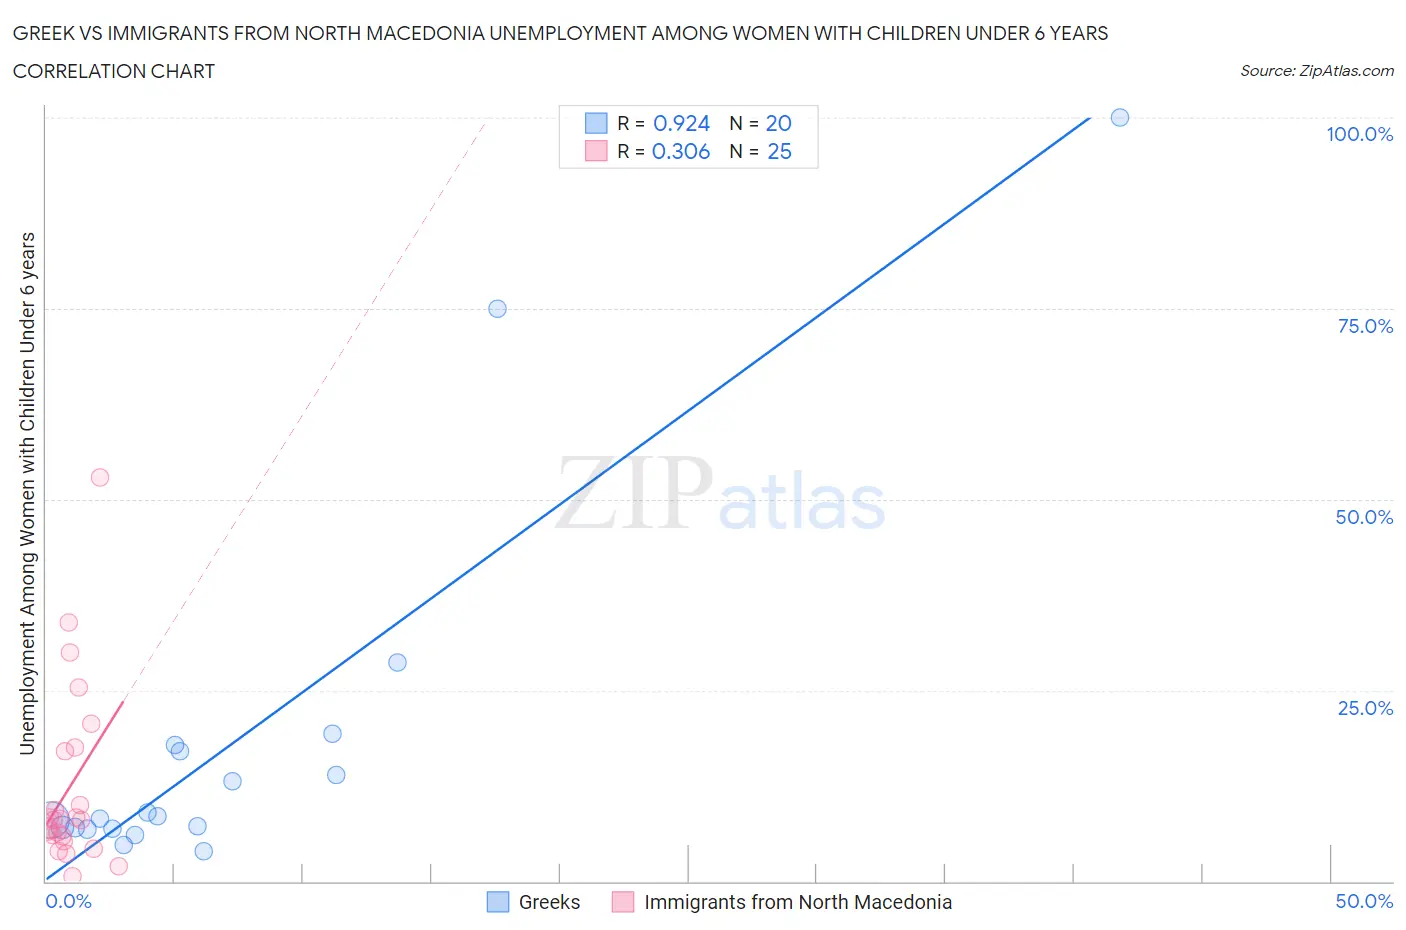 Greek vs Immigrants from North Macedonia Unemployment Among Women with Children Under 6 years